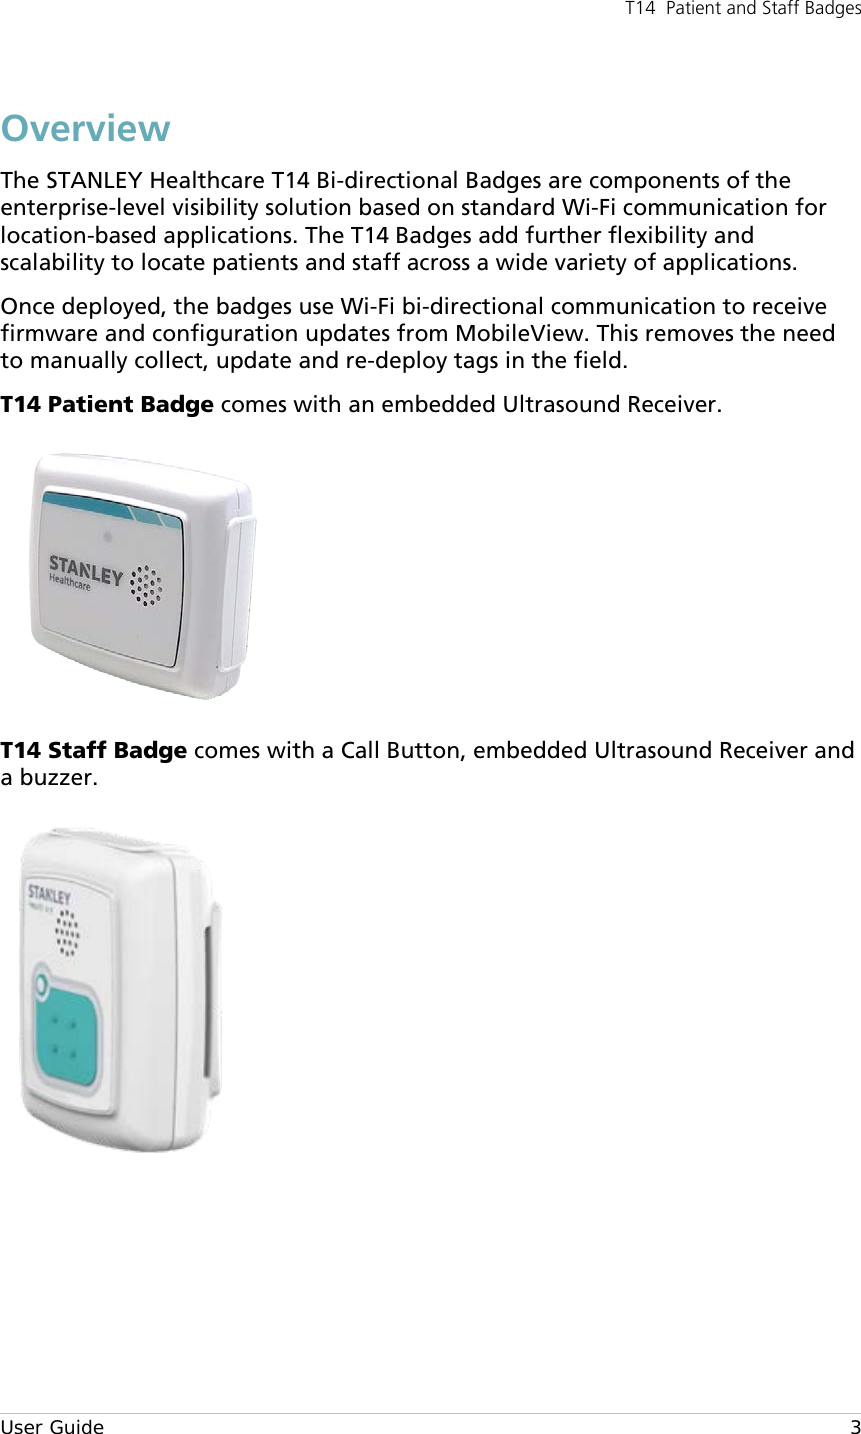 T14  Patient and Staff Badges  User Guide     3 Overview The STANLEY Healthcare T14 Bi-directional Badges are components of the enterprise-level visibility solution based on standard Wi-Fi communication for location-based applications. The T14 Badges add further flexibility and scalability to locate patients and staff across a wide variety of applications. Once deployed, the badges use Wi-Fi bi-directional communication to receive firmware and configuration updates from MobileView. This removes the need to manually collect, update and re-deploy tags in the field. T14 Patient Badge comes with an embedded Ultrasound Receiver.   T14 Staff Badge comes with a Call Button, embedded Ultrasound Receiver and a buzzer.      